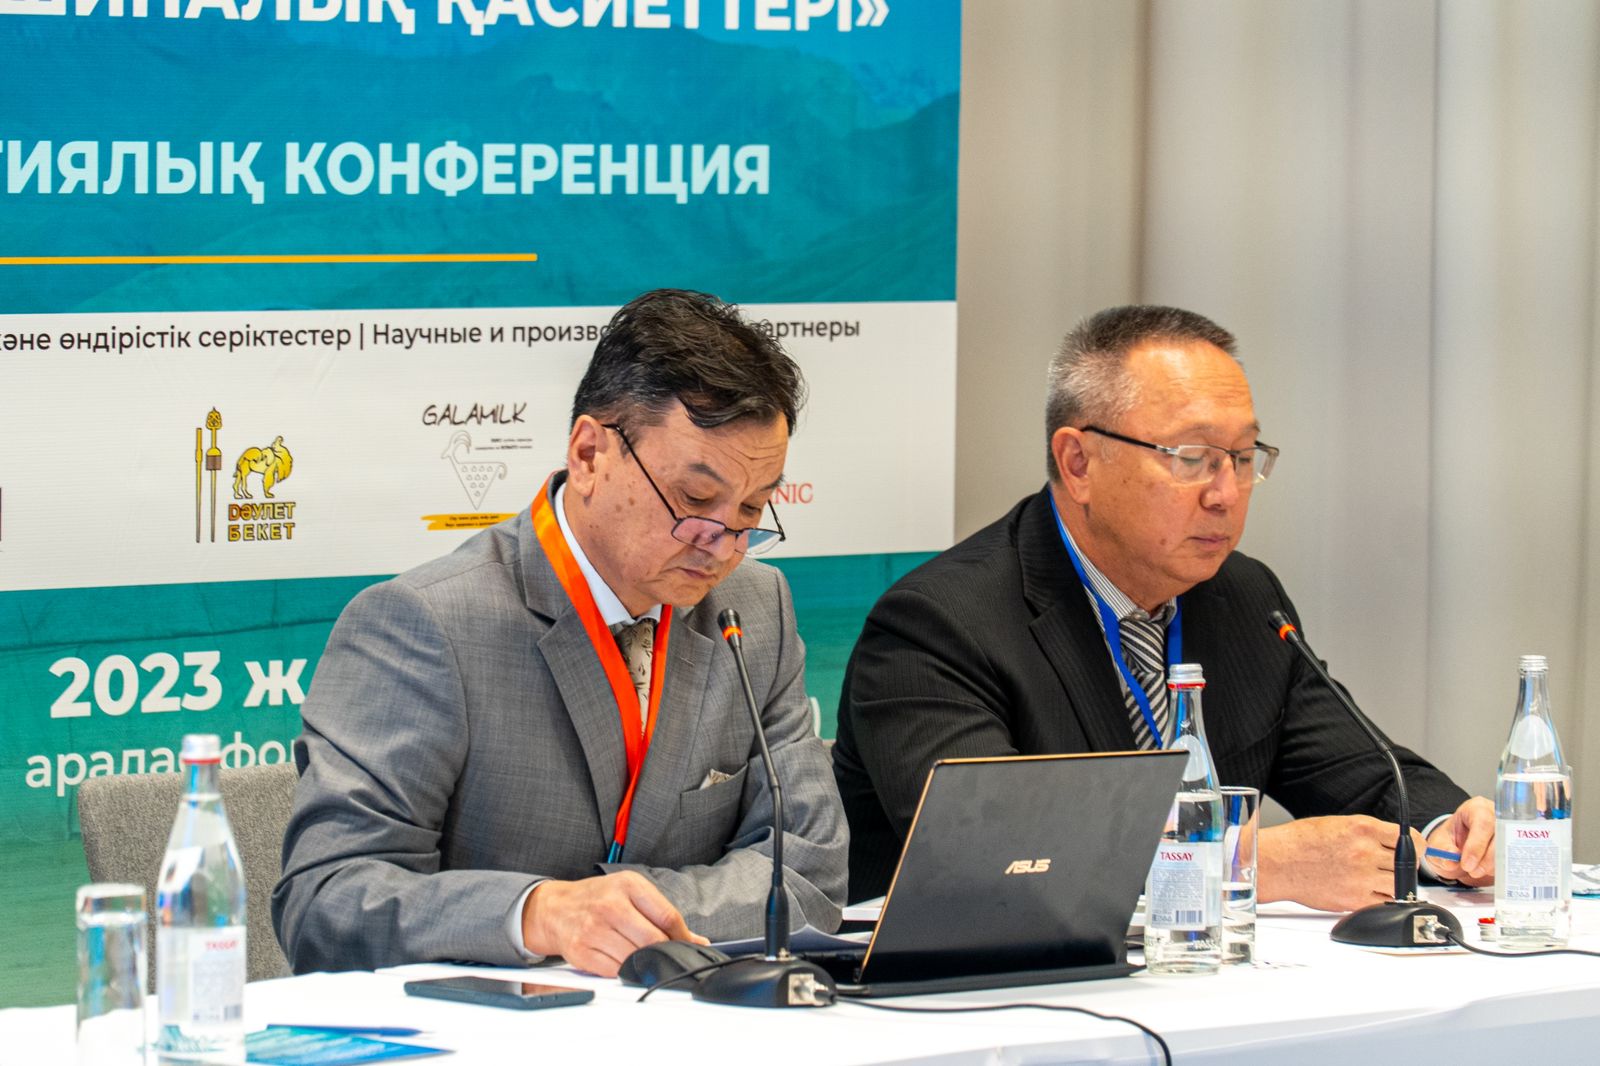 Bakytzhan Bimbetov, Chief Gastroenterologist of the Medical Center Hospital of the President’s Affairs Administration of the Republic of Kazakhstan, participated in the International Conference